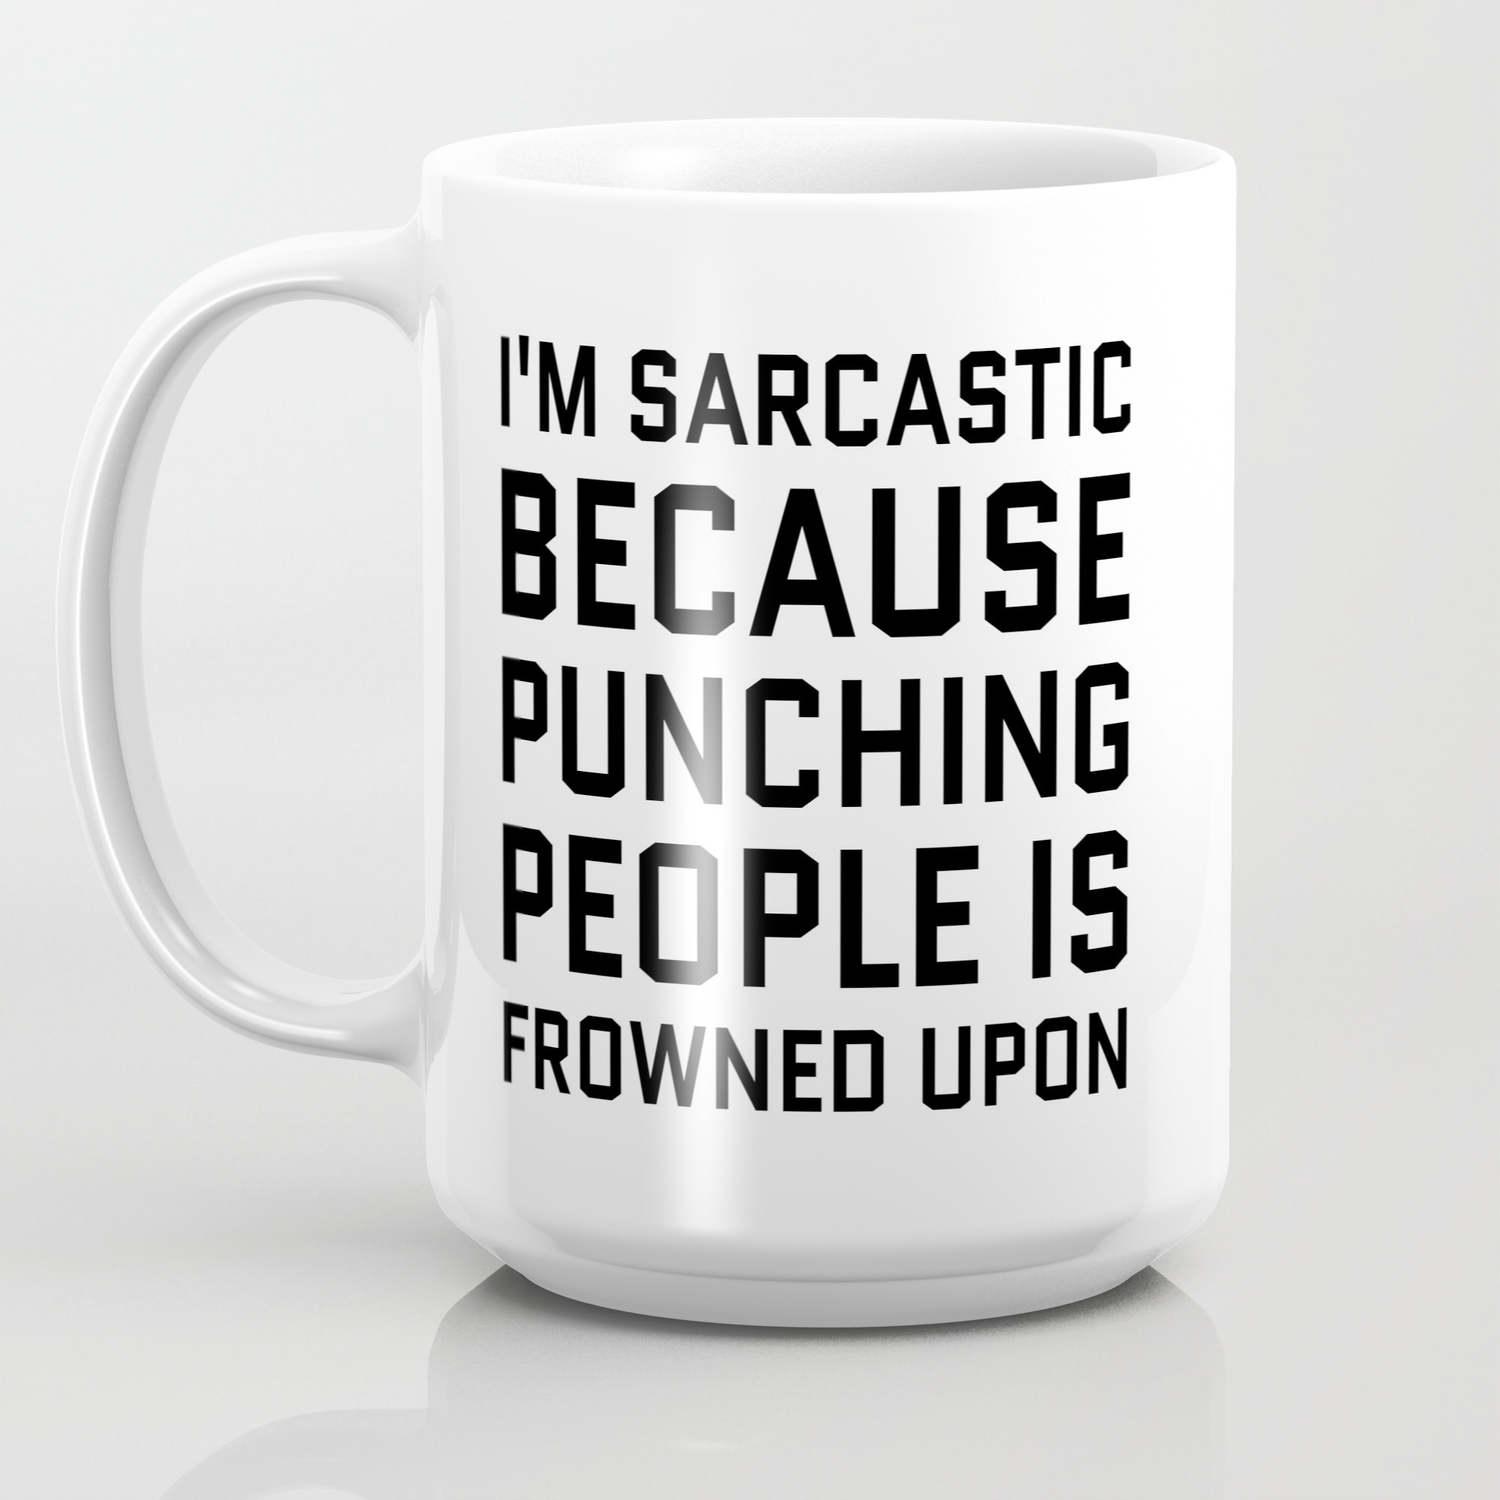 Coffee Cup Travel Mug 11 15 I'm Sarcastic Becausing Punching People Frowned On 